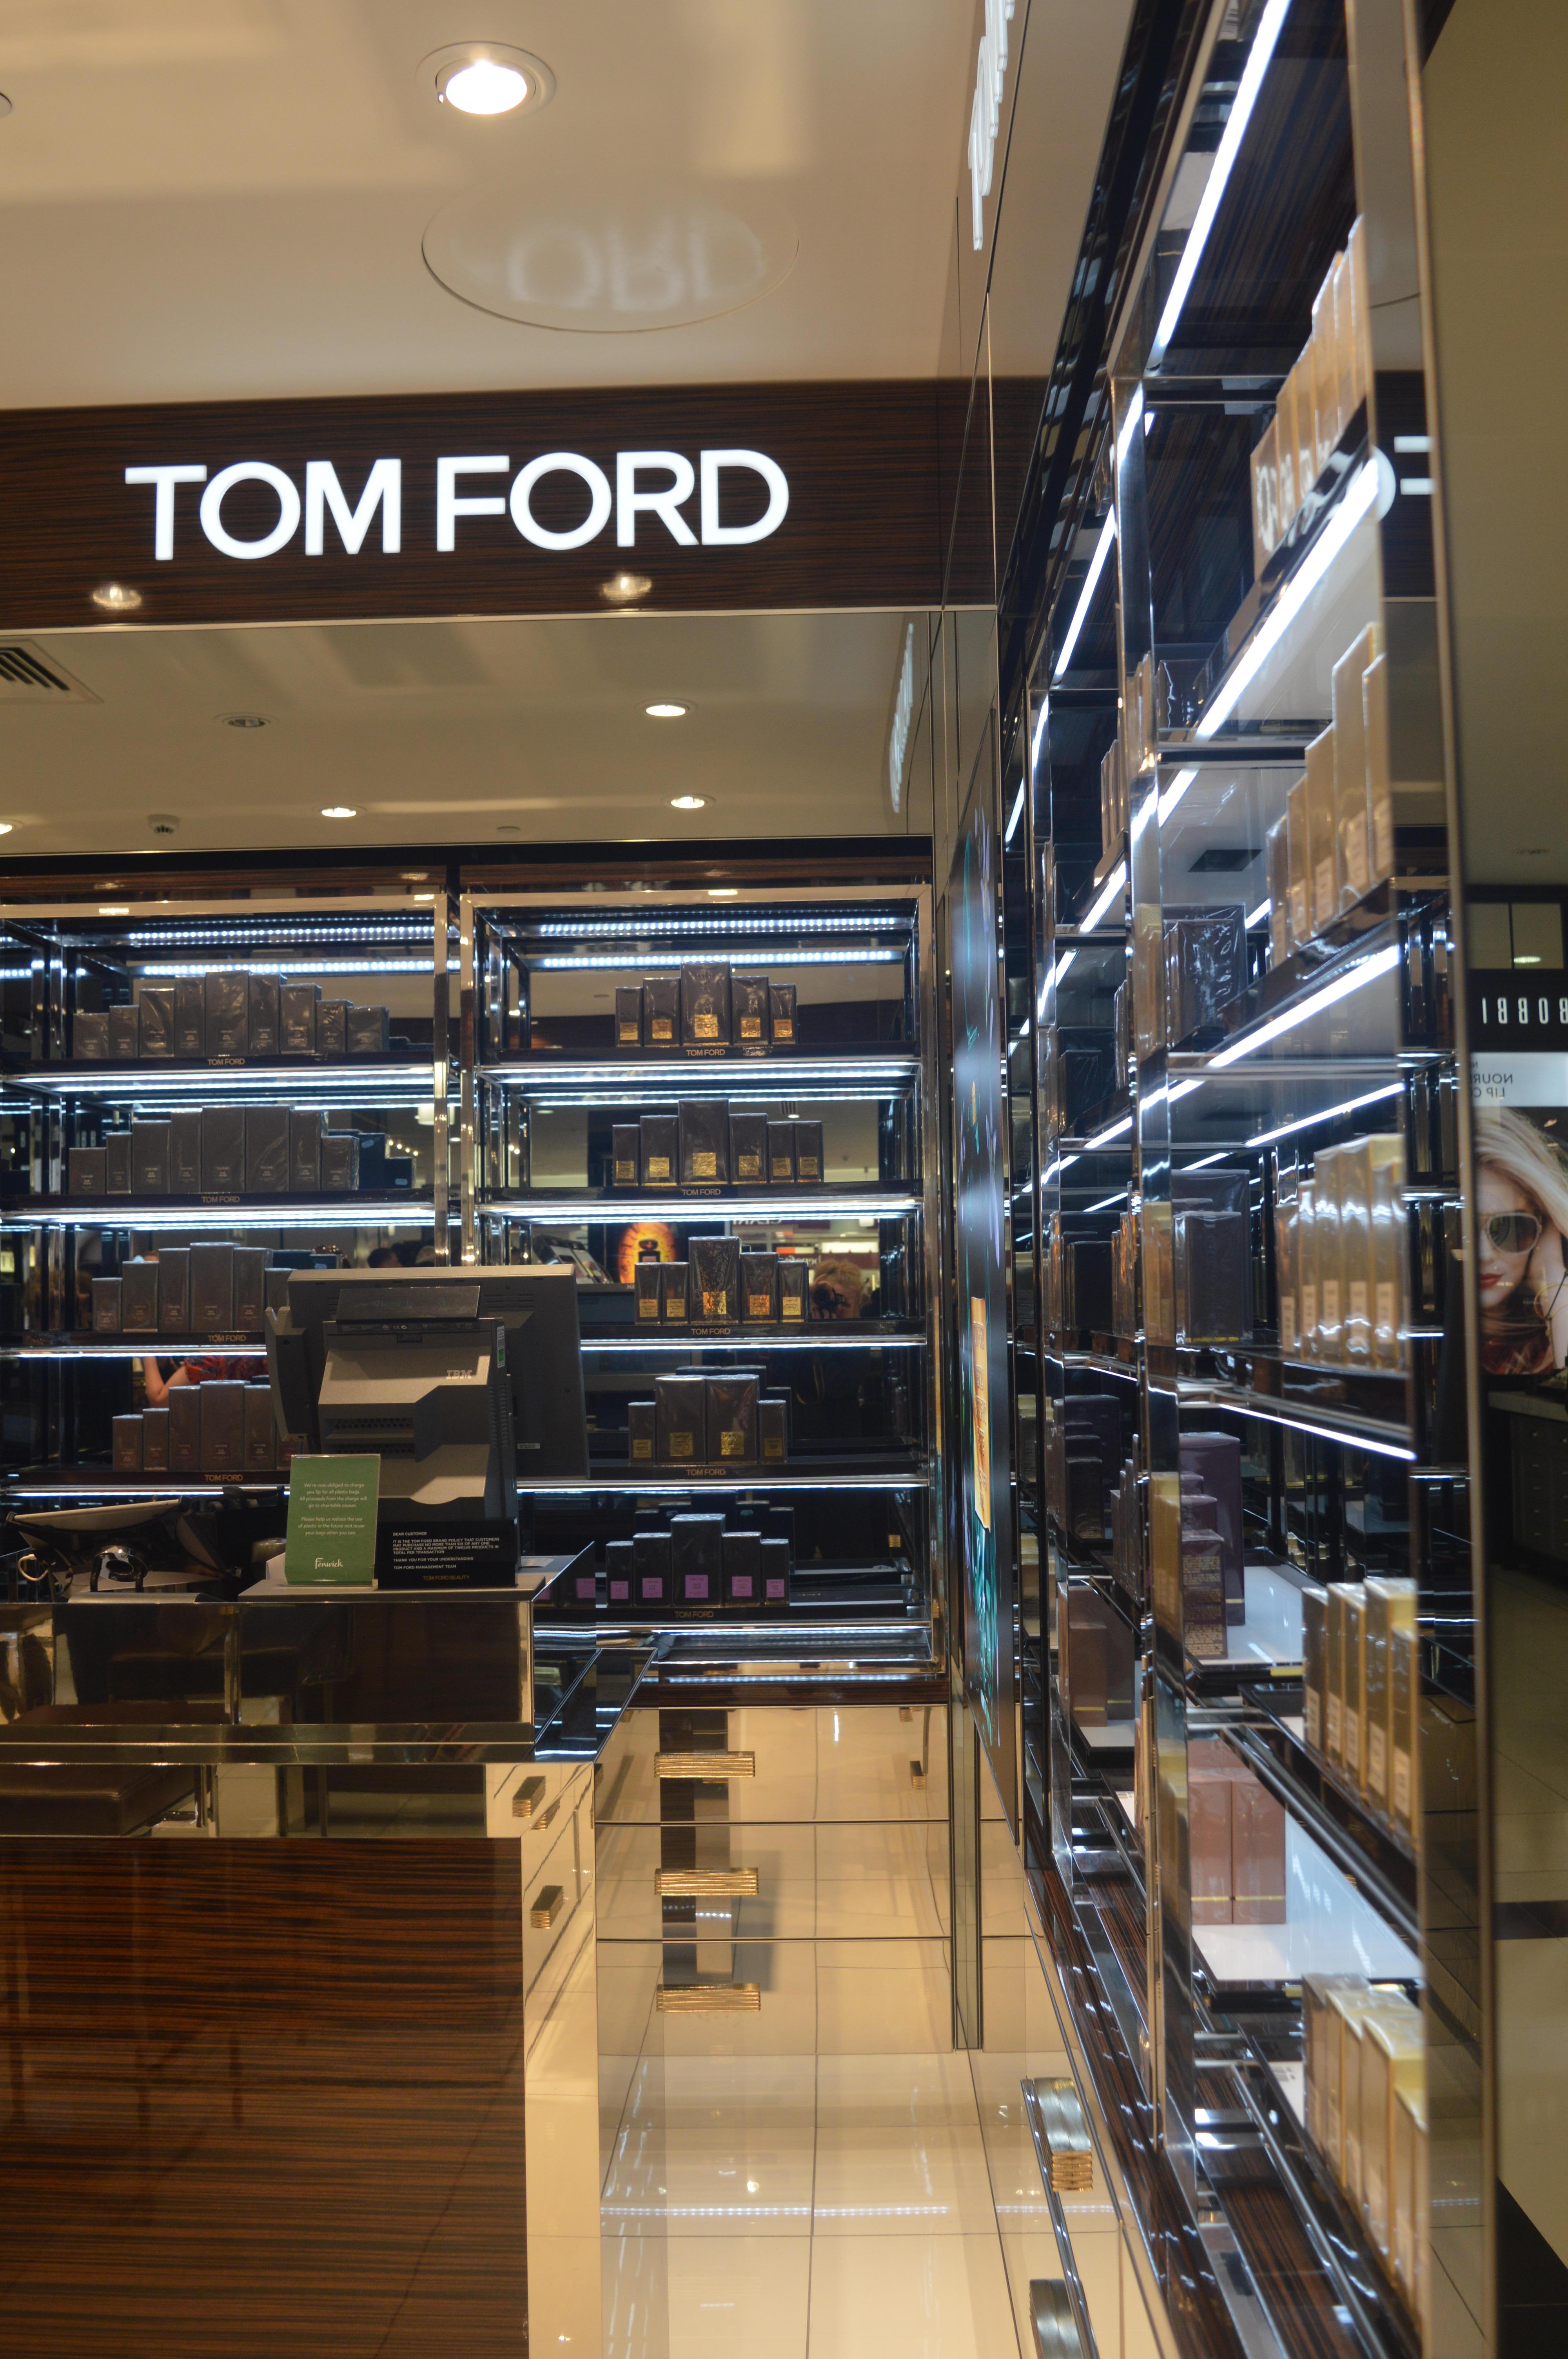 tom-ford-counter-fenwick-newcastle-beauty-blogger-event-beauty-week